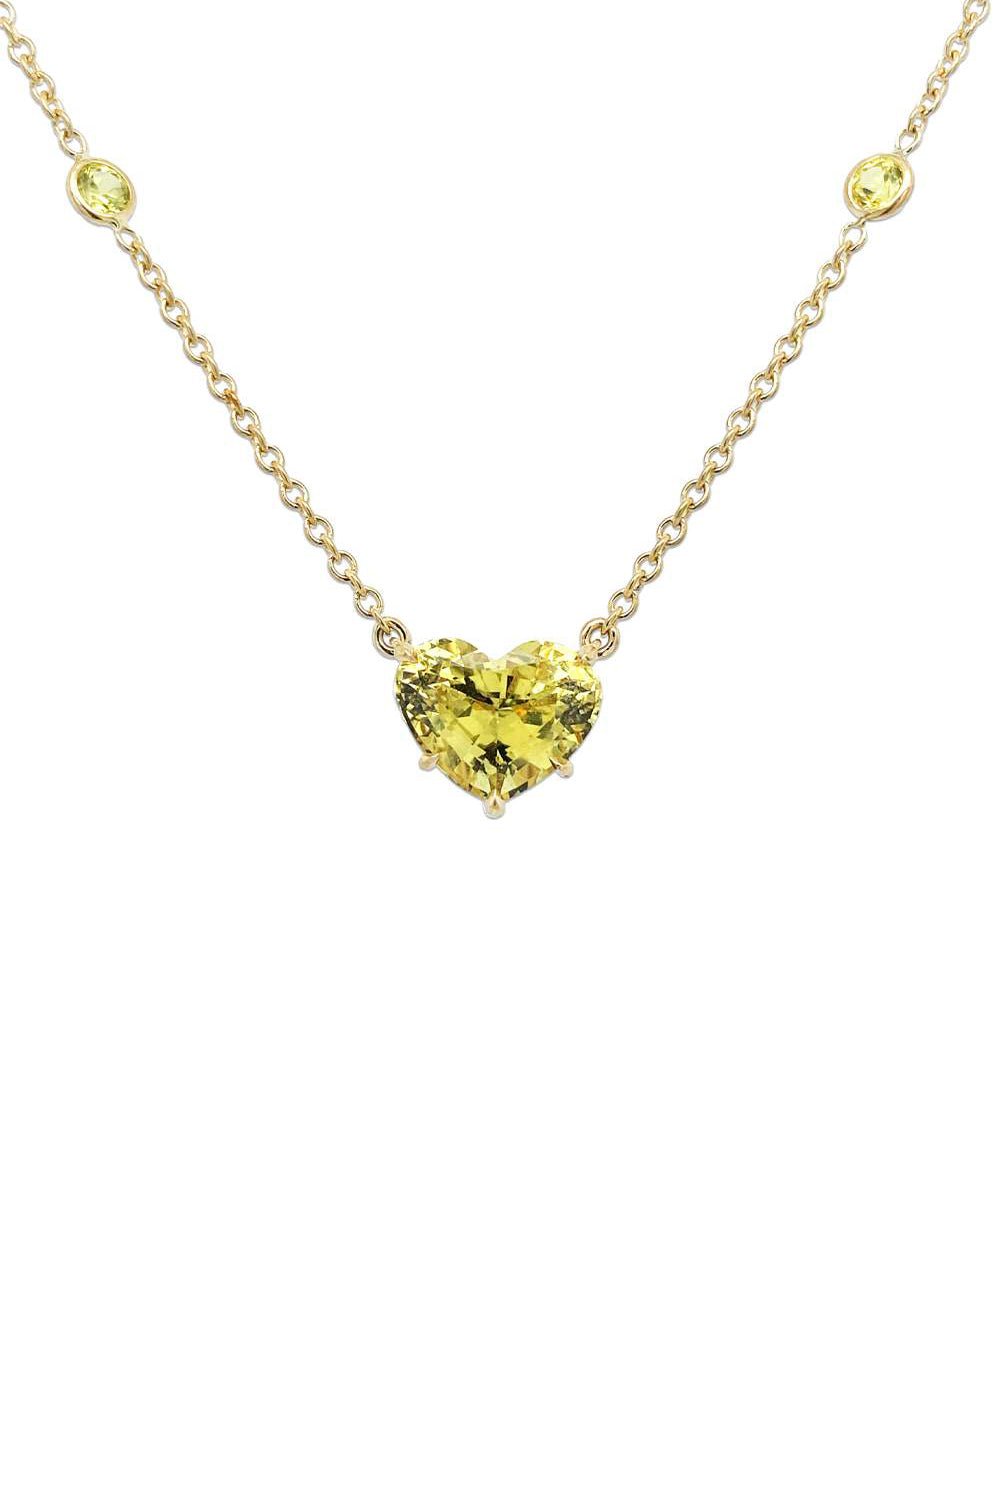 BAYCO-Yellow Sapphire Heart Necklace-